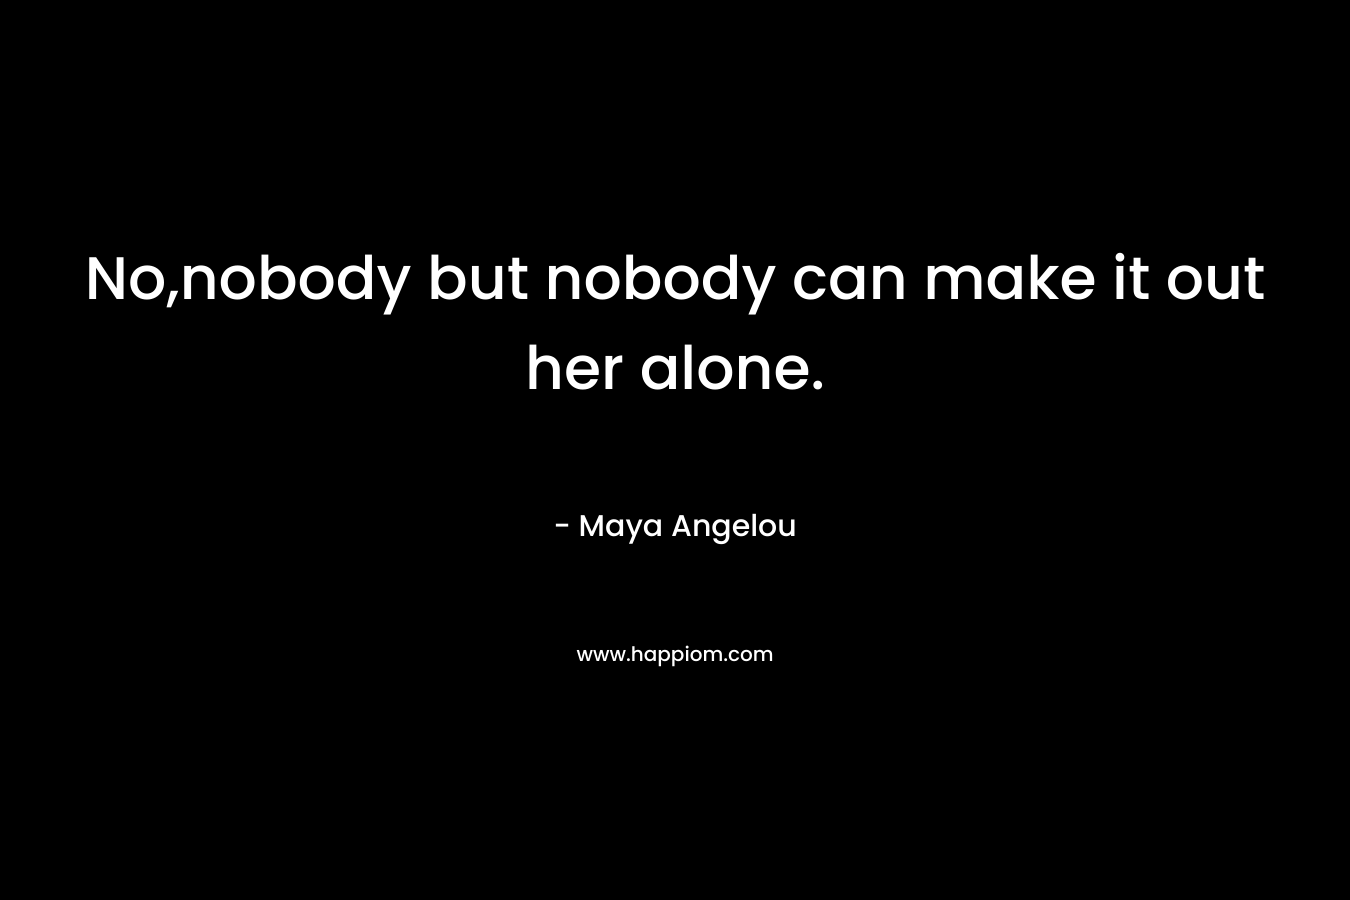 No,nobody but nobody can make it out her alone.